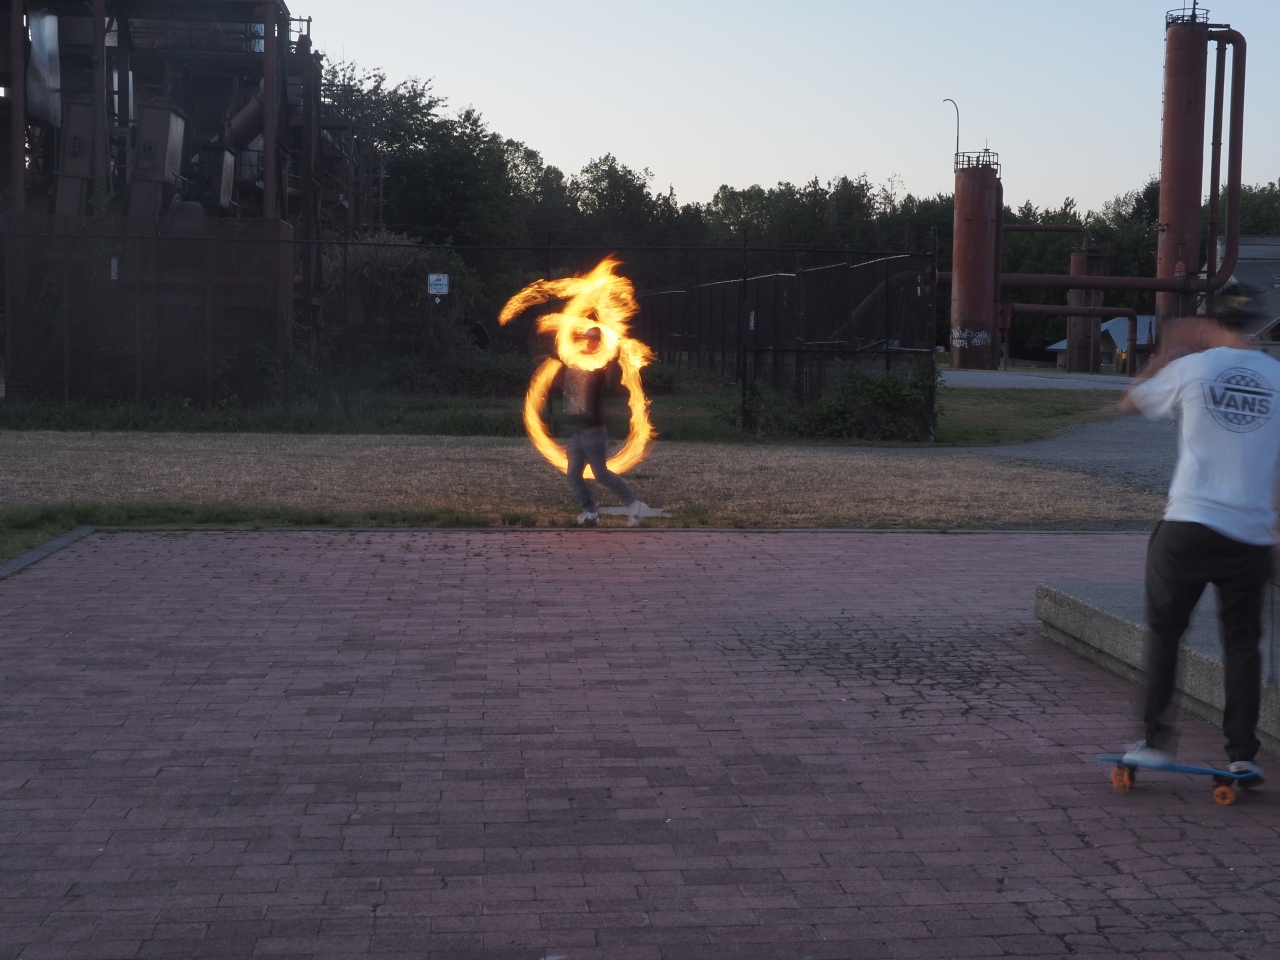 Playing with fire, one second exposure